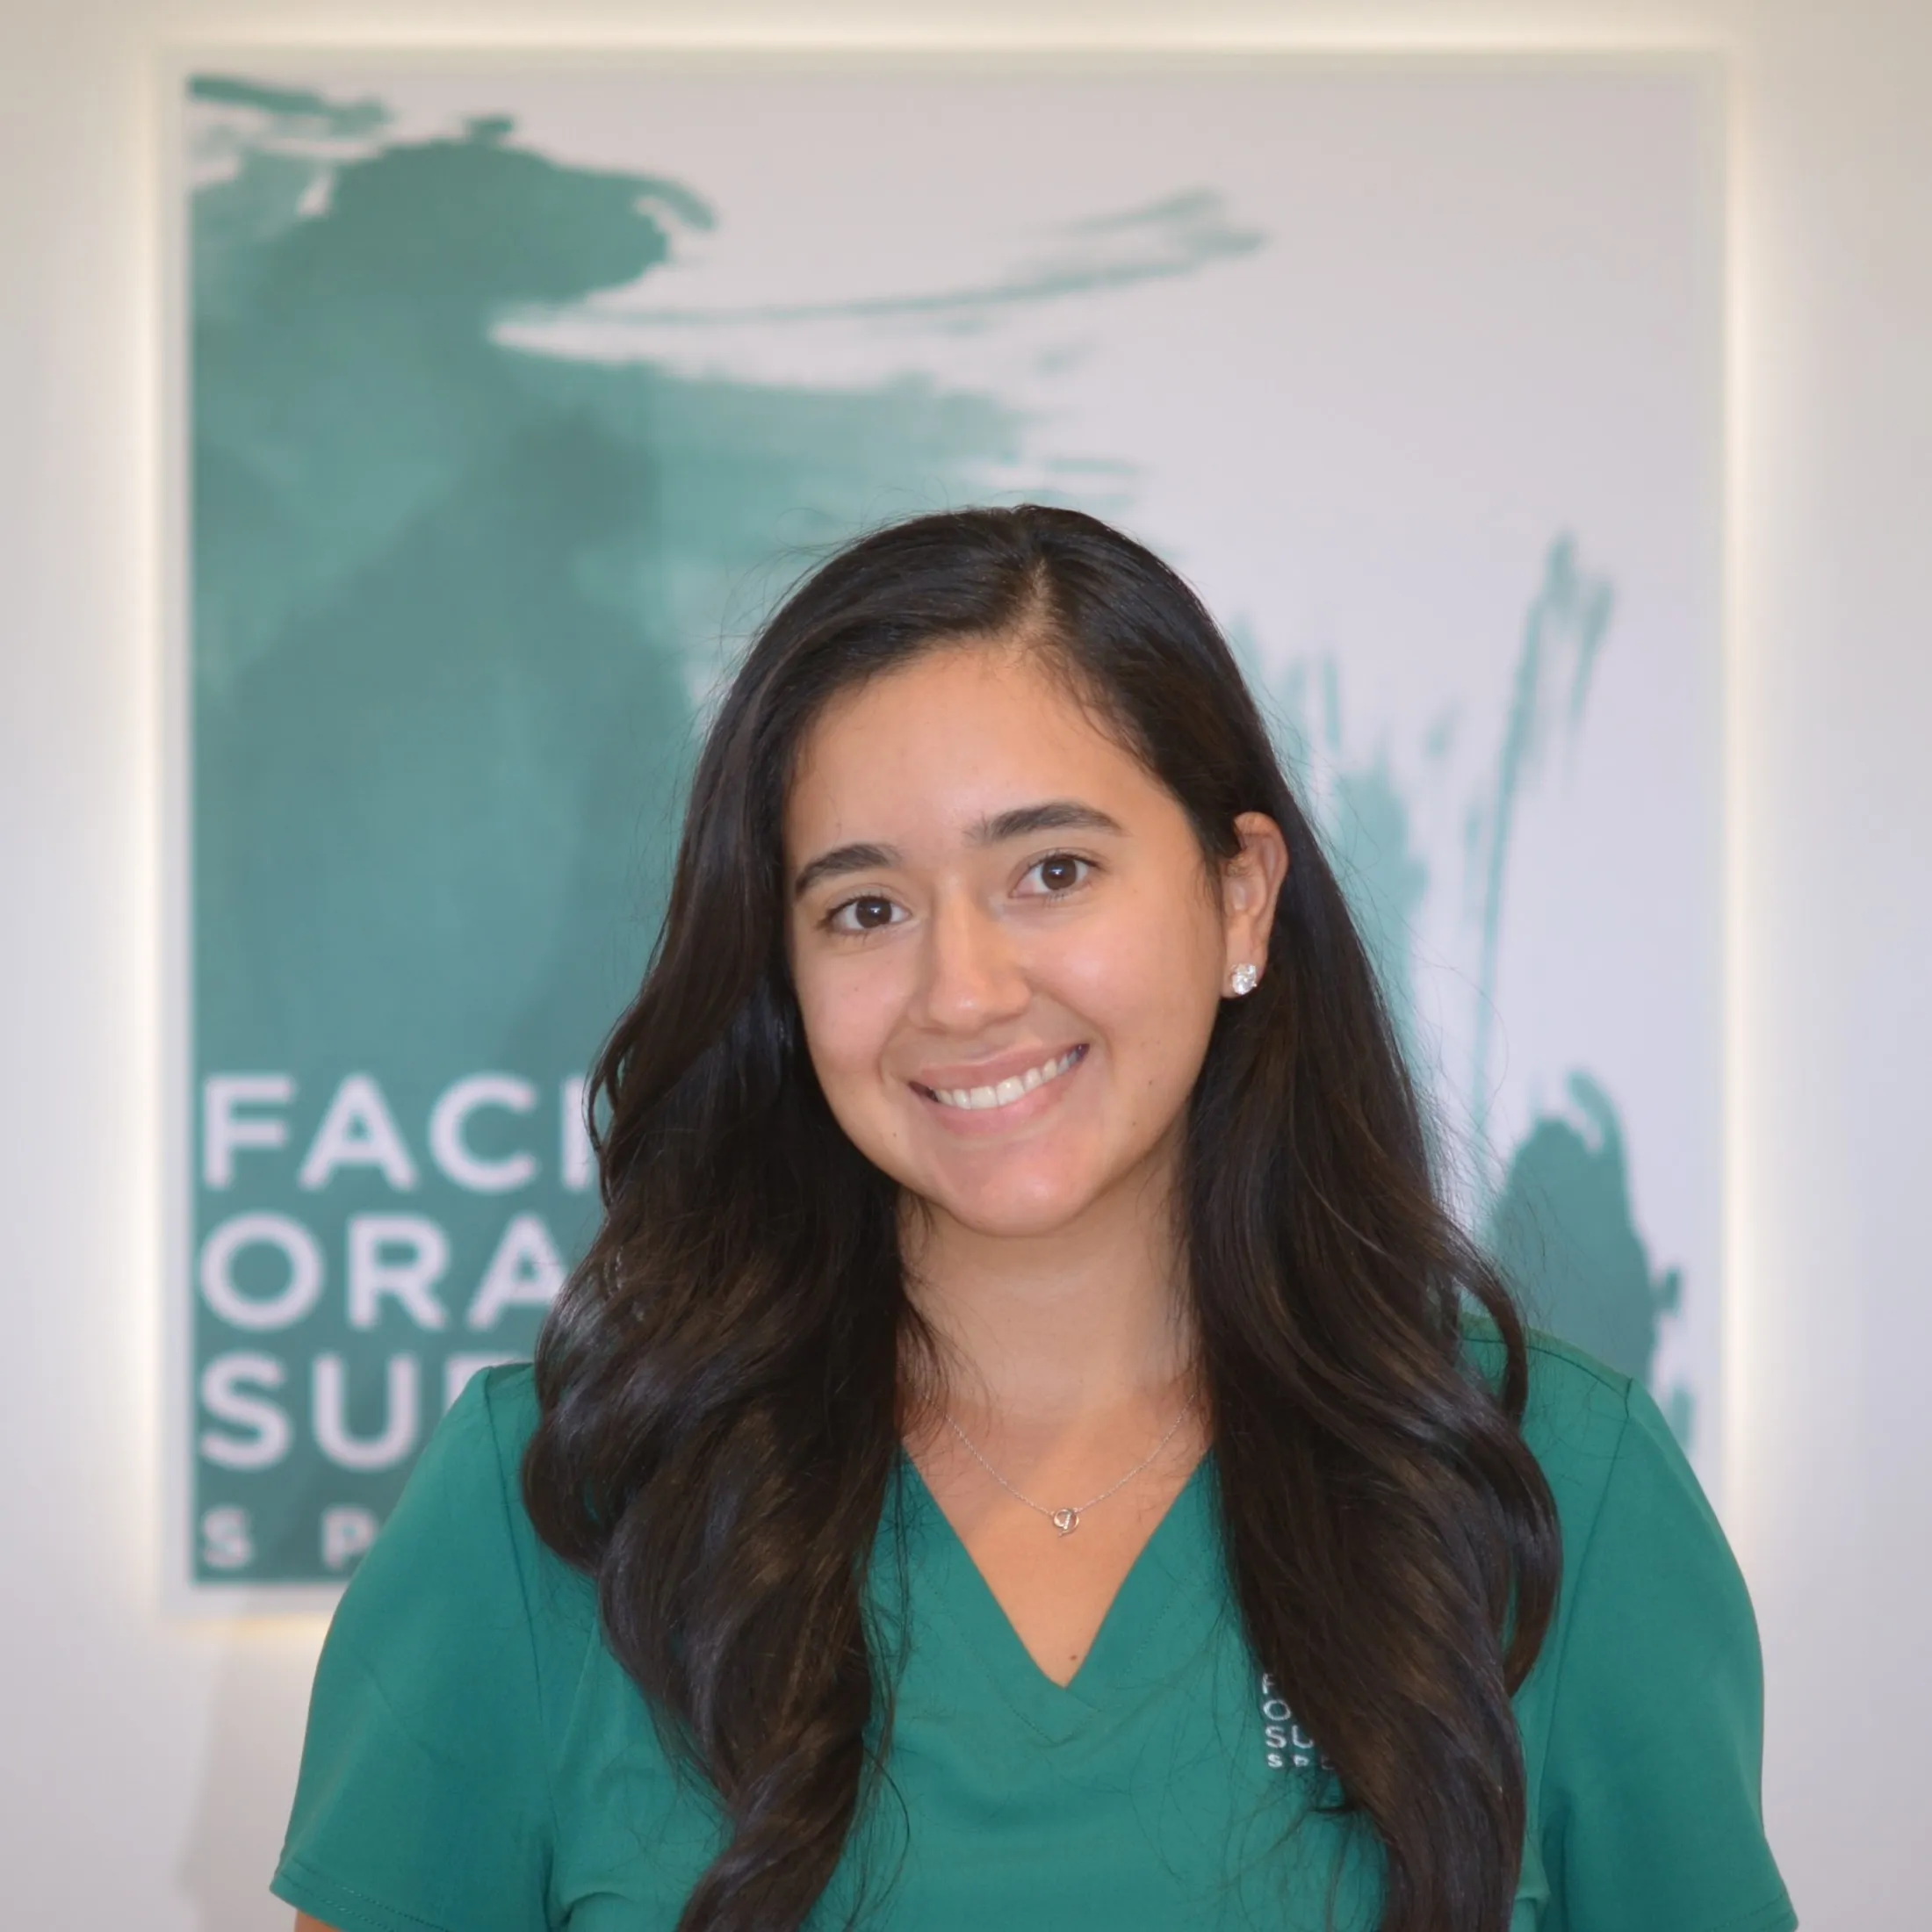 DESTINY  Surgical Assistant at Facial and Oral Surgery Specialists